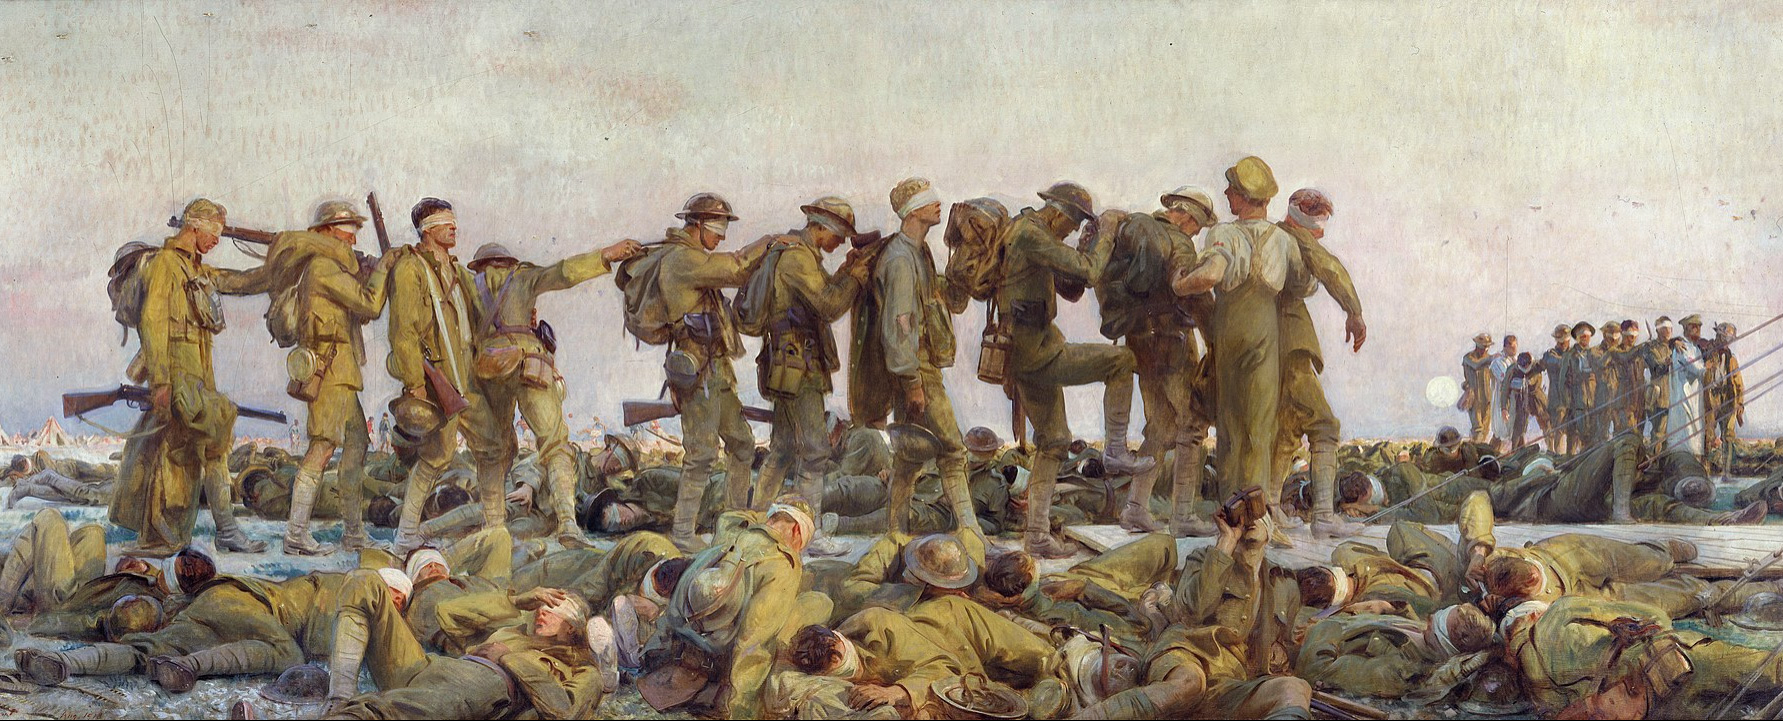 John Singer Sargent's Gassed presents a classical frieze of soldiers being led from the battlefield - alive, but changed forever by individual encounters with deadly hazard in war